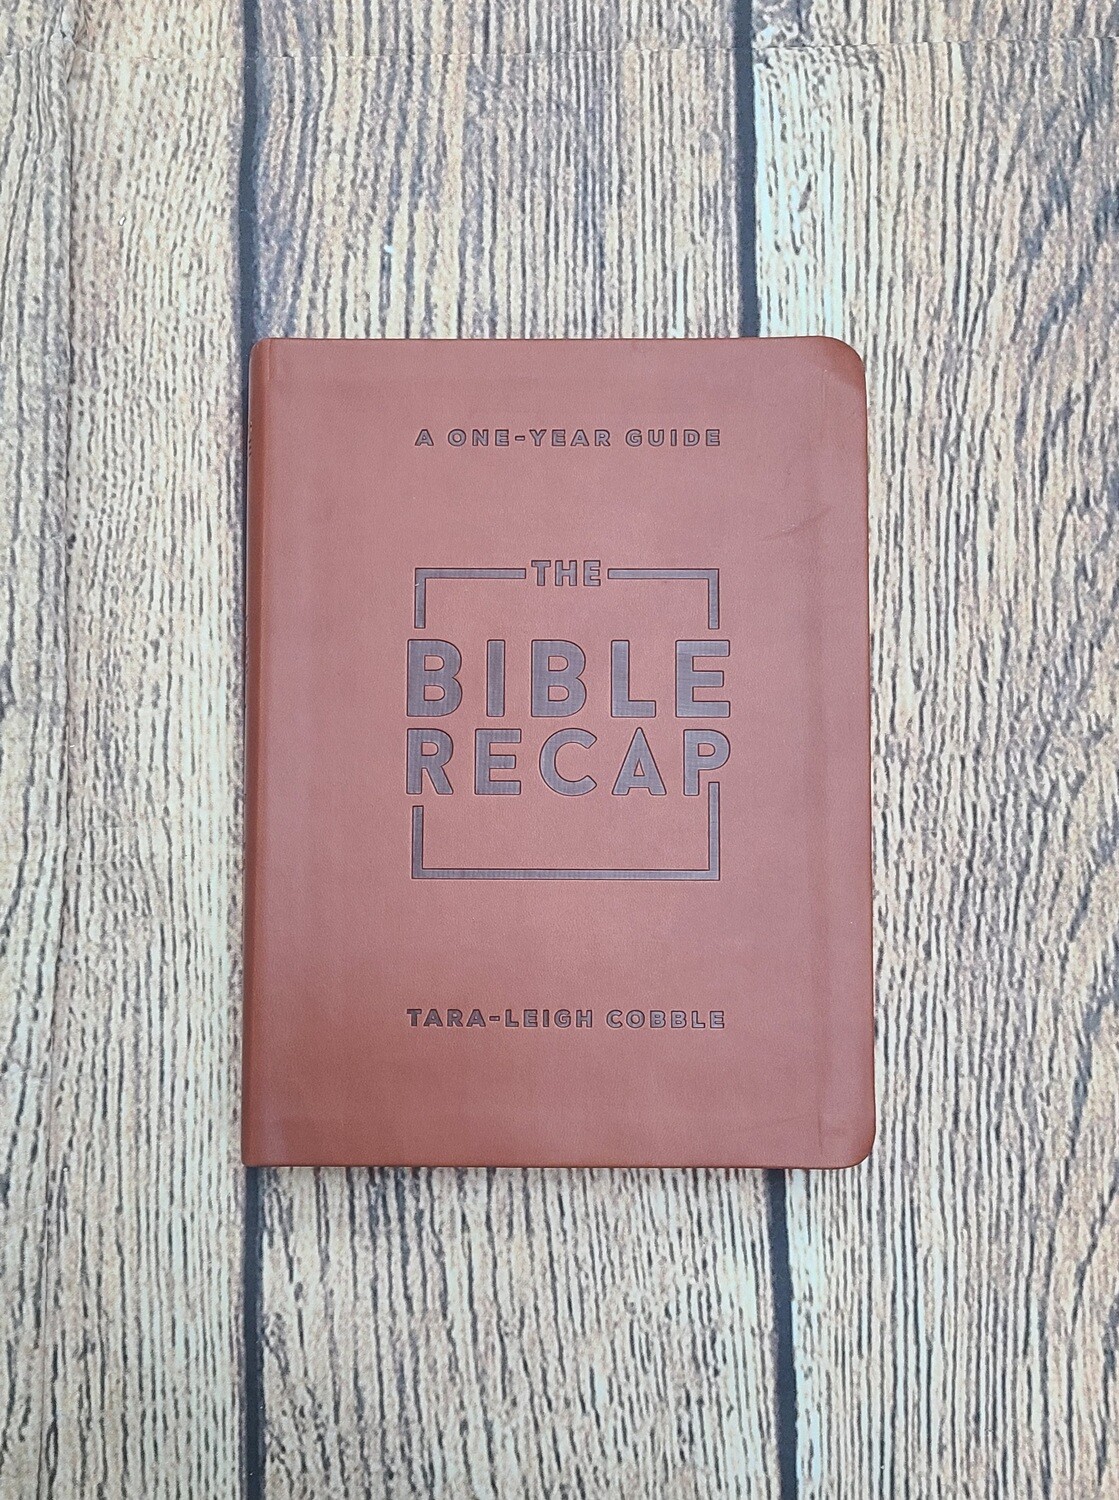 The Bible Recap: A One-Year Guide Deluxe Edition by Tara-Leigh Cobble - Leatherbound Paperback - New